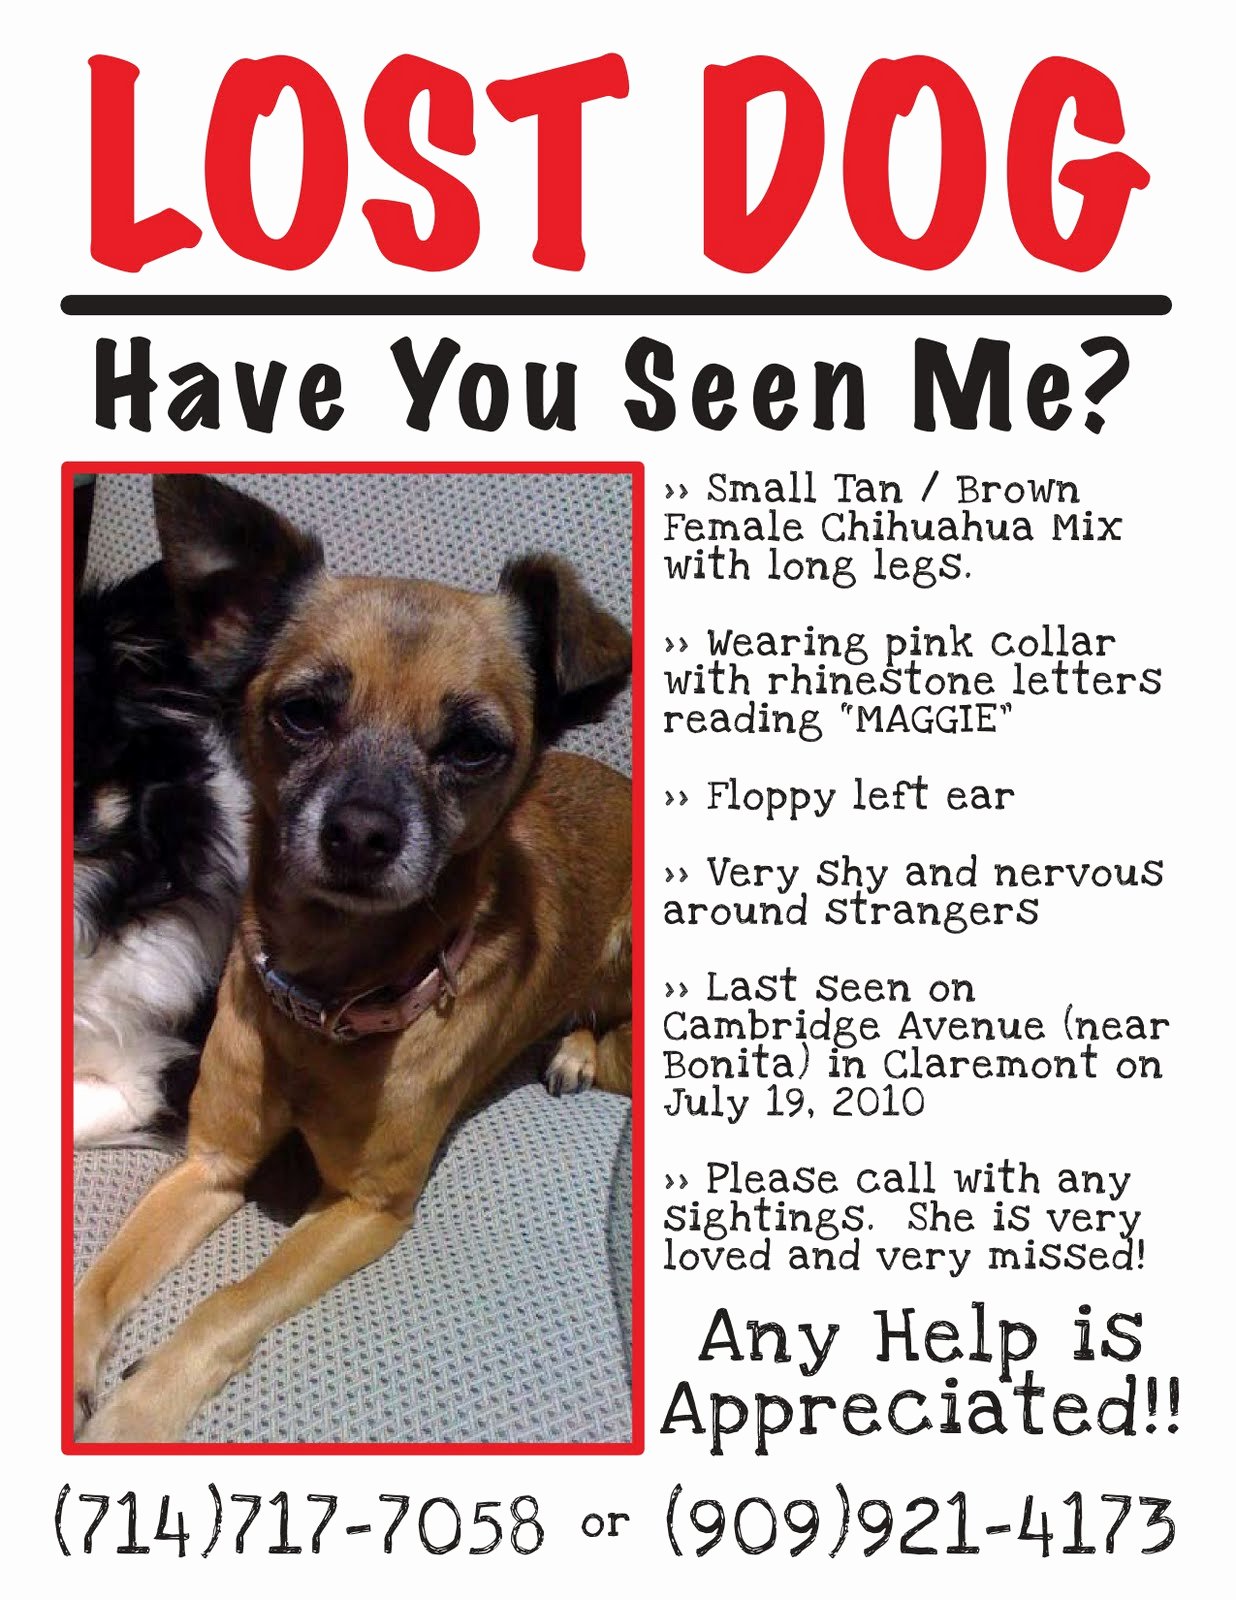 Lost Pet Flyer Template Awesome Claremont Insider Lost Dog